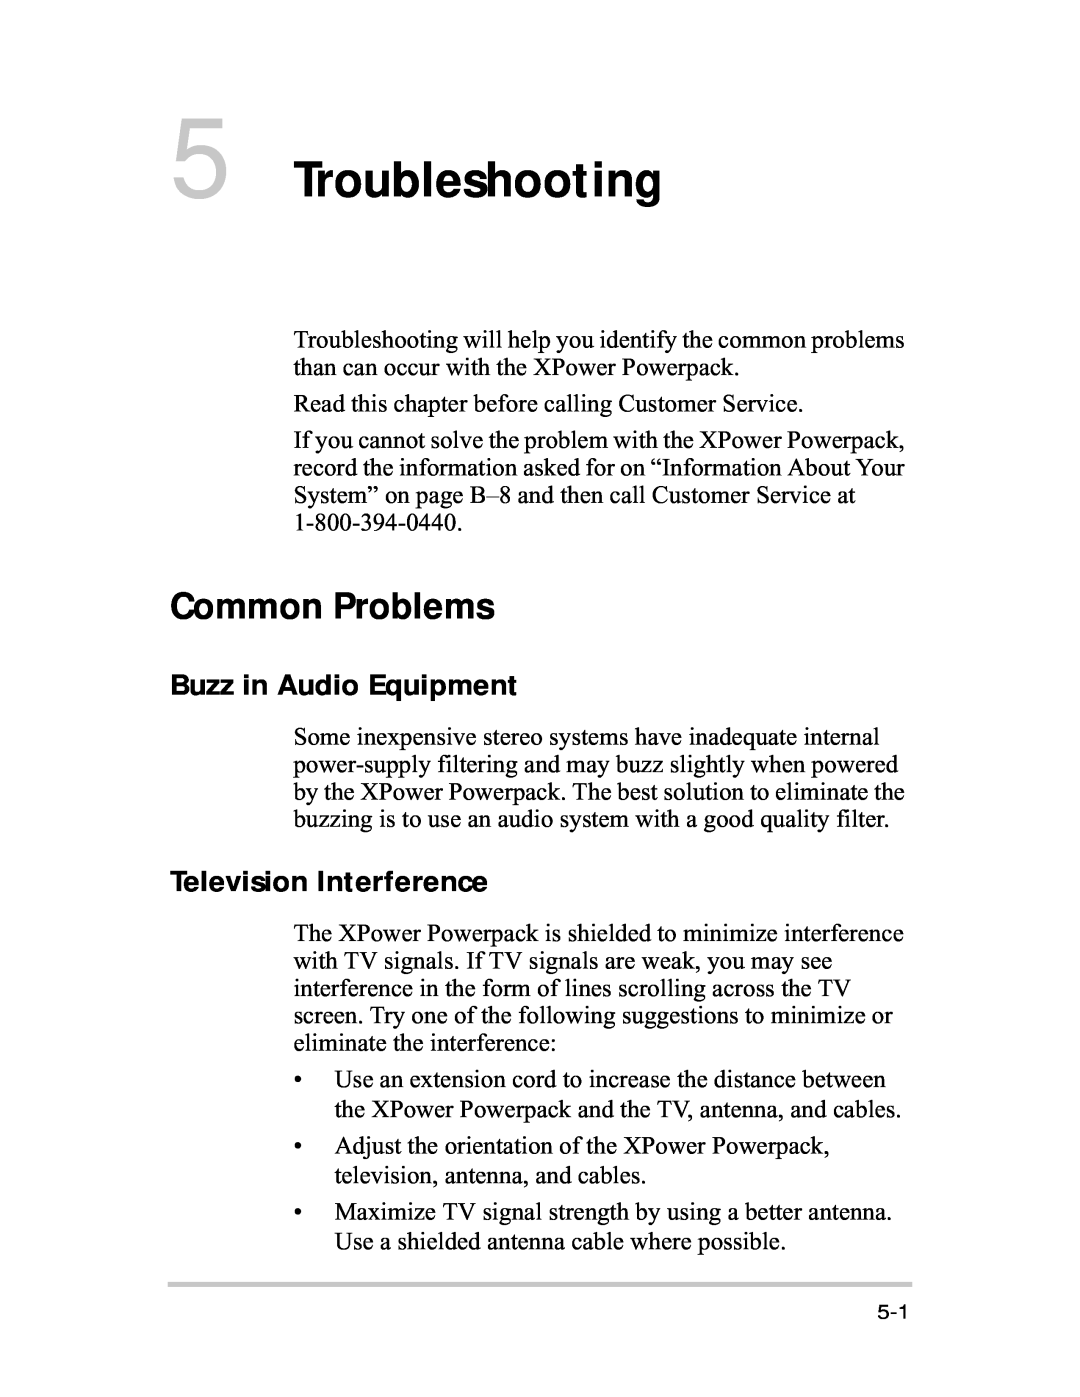 Xantrex Technology 400R manual Troubleshooting, Common Problems, Buzz in Audio Equipment, Television Interference 